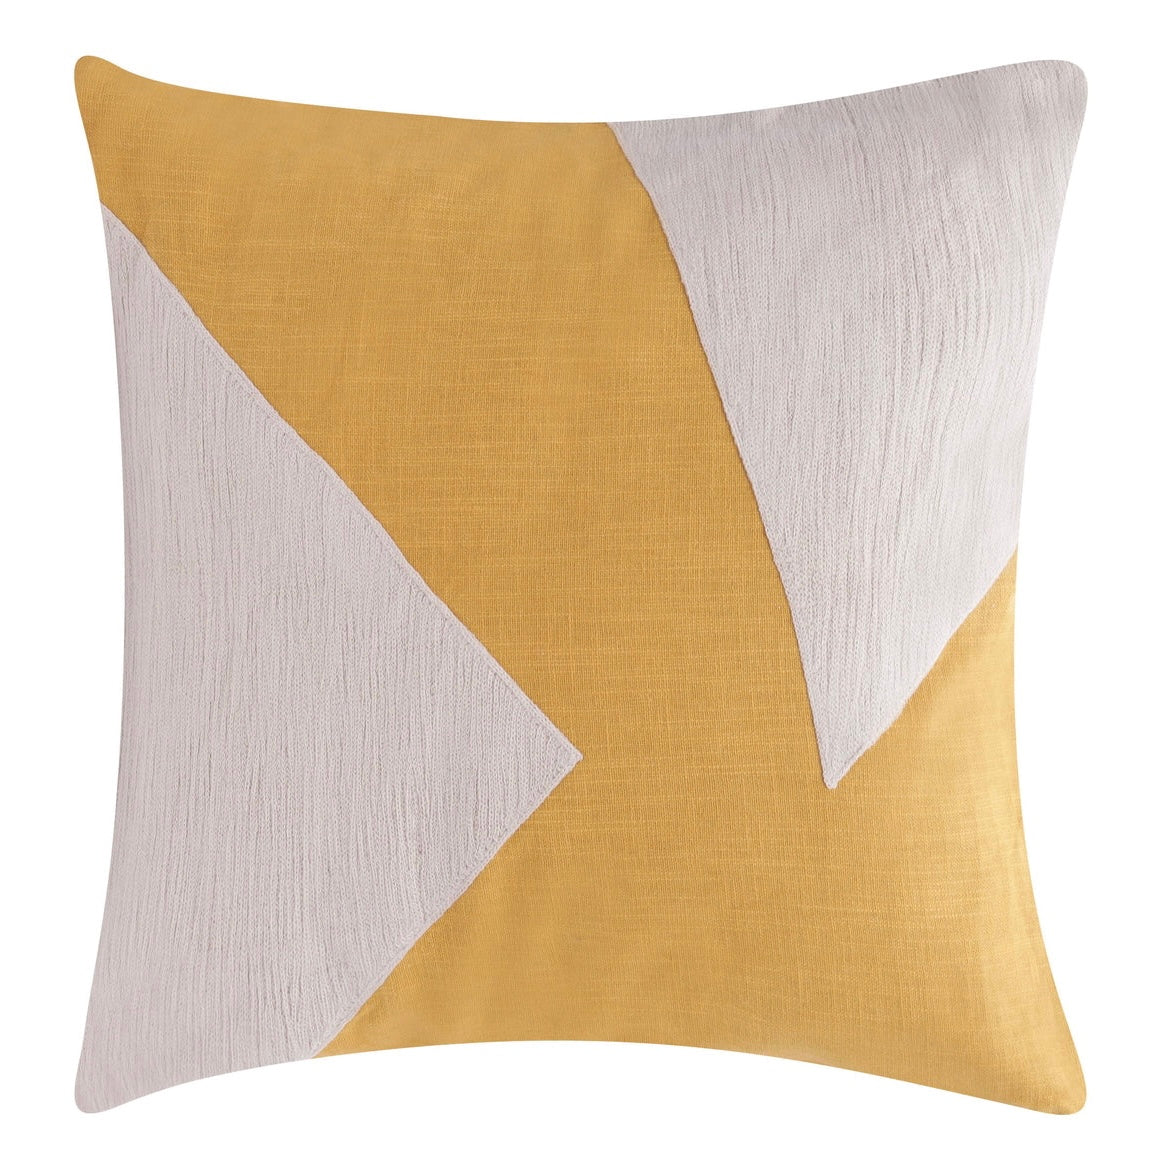 The Handmade Ochre Colorblock Throw Pillow against a blank white background - The Offbeat Co.